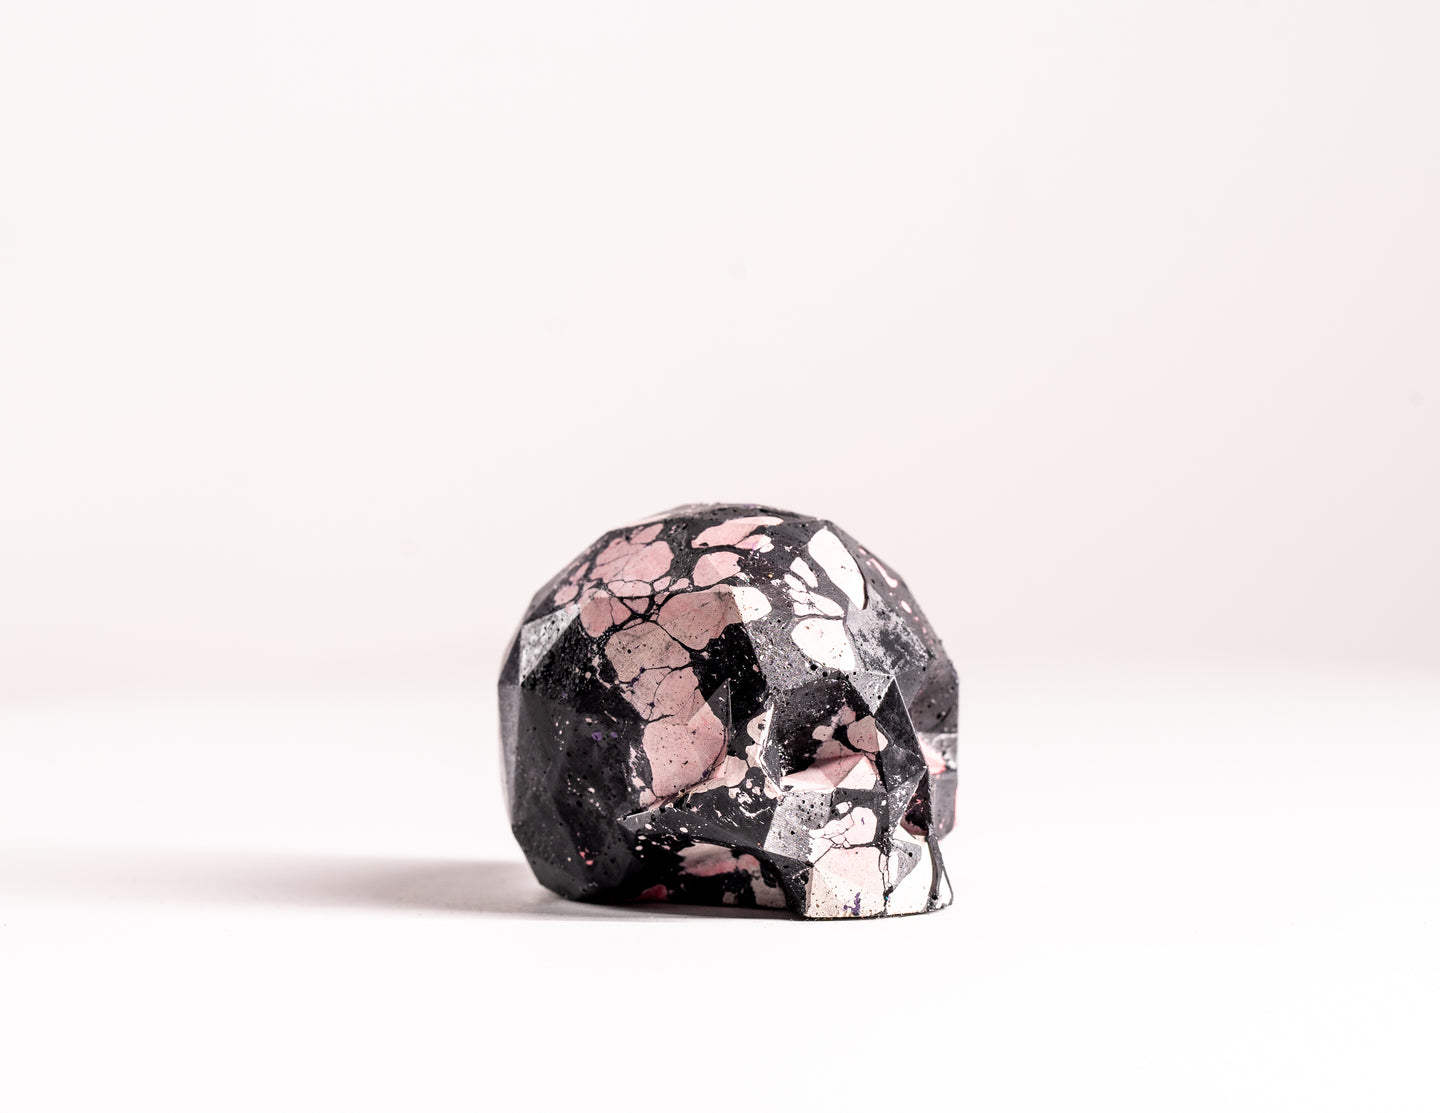 Mini Collectible Skull - Marbled - 52